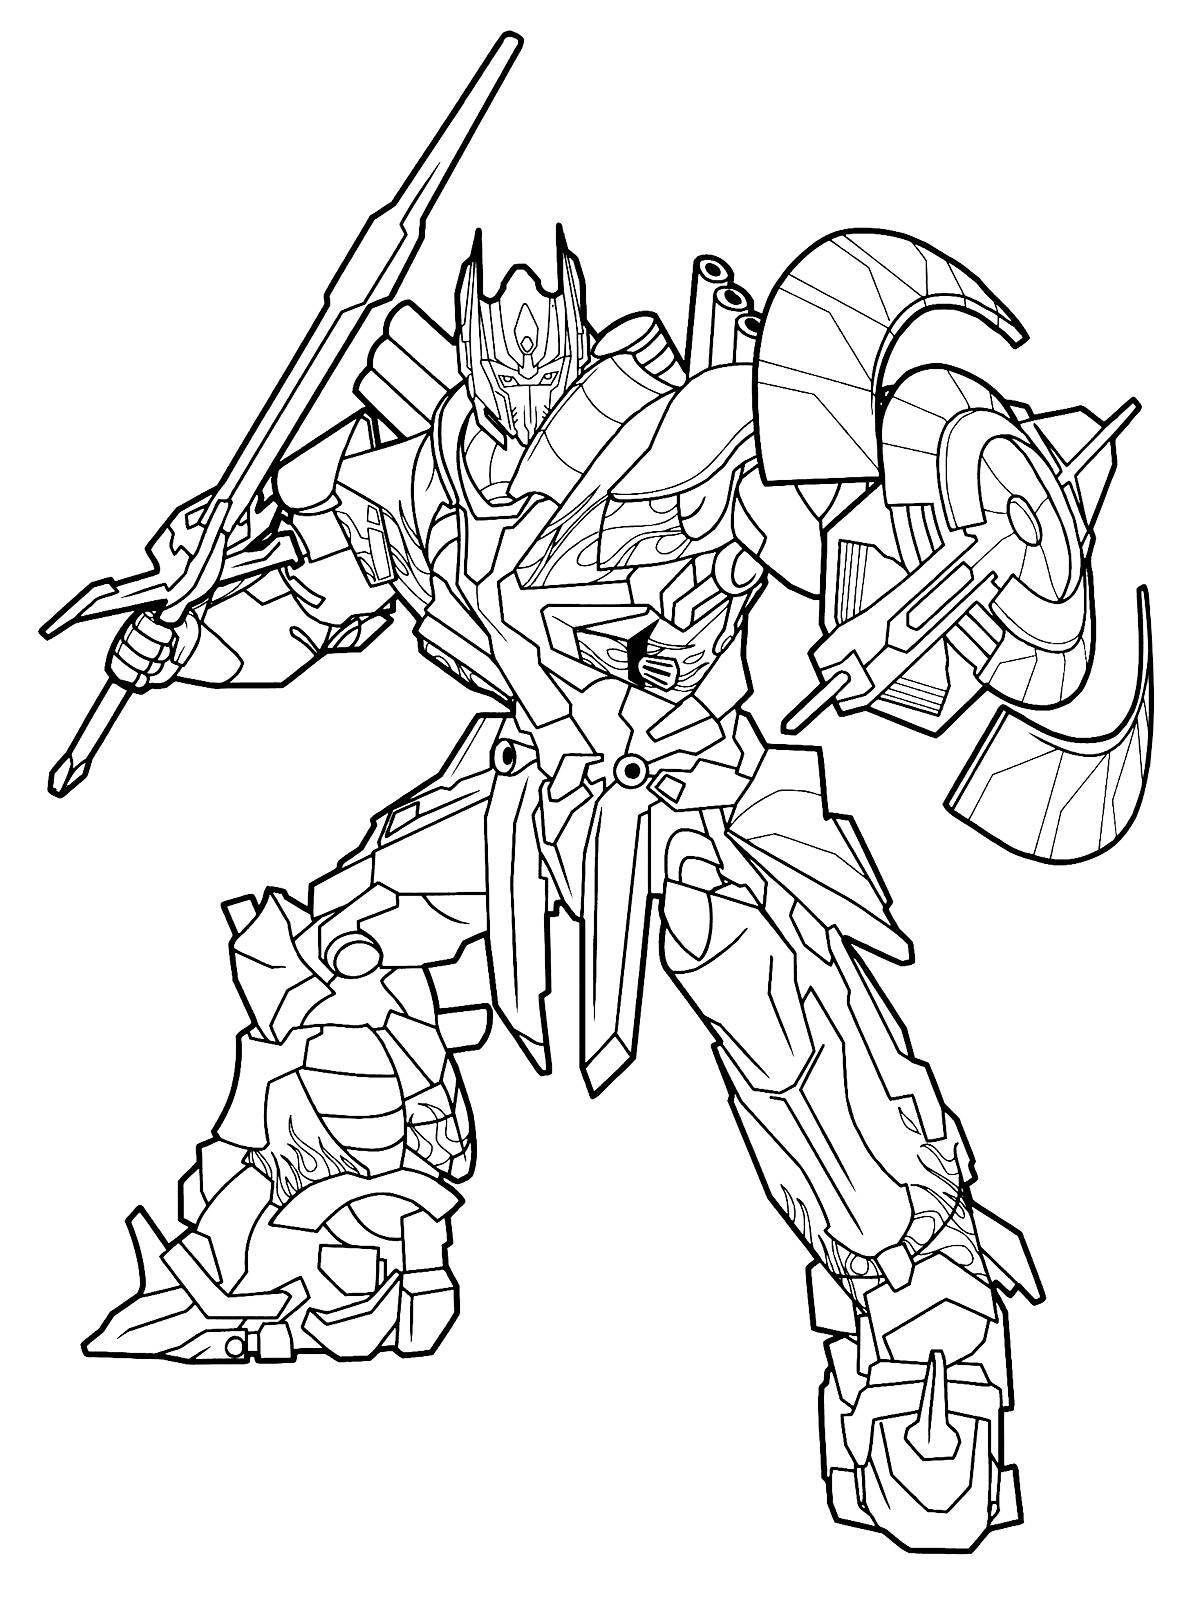 Wonderful Autobots coloring pages for kids